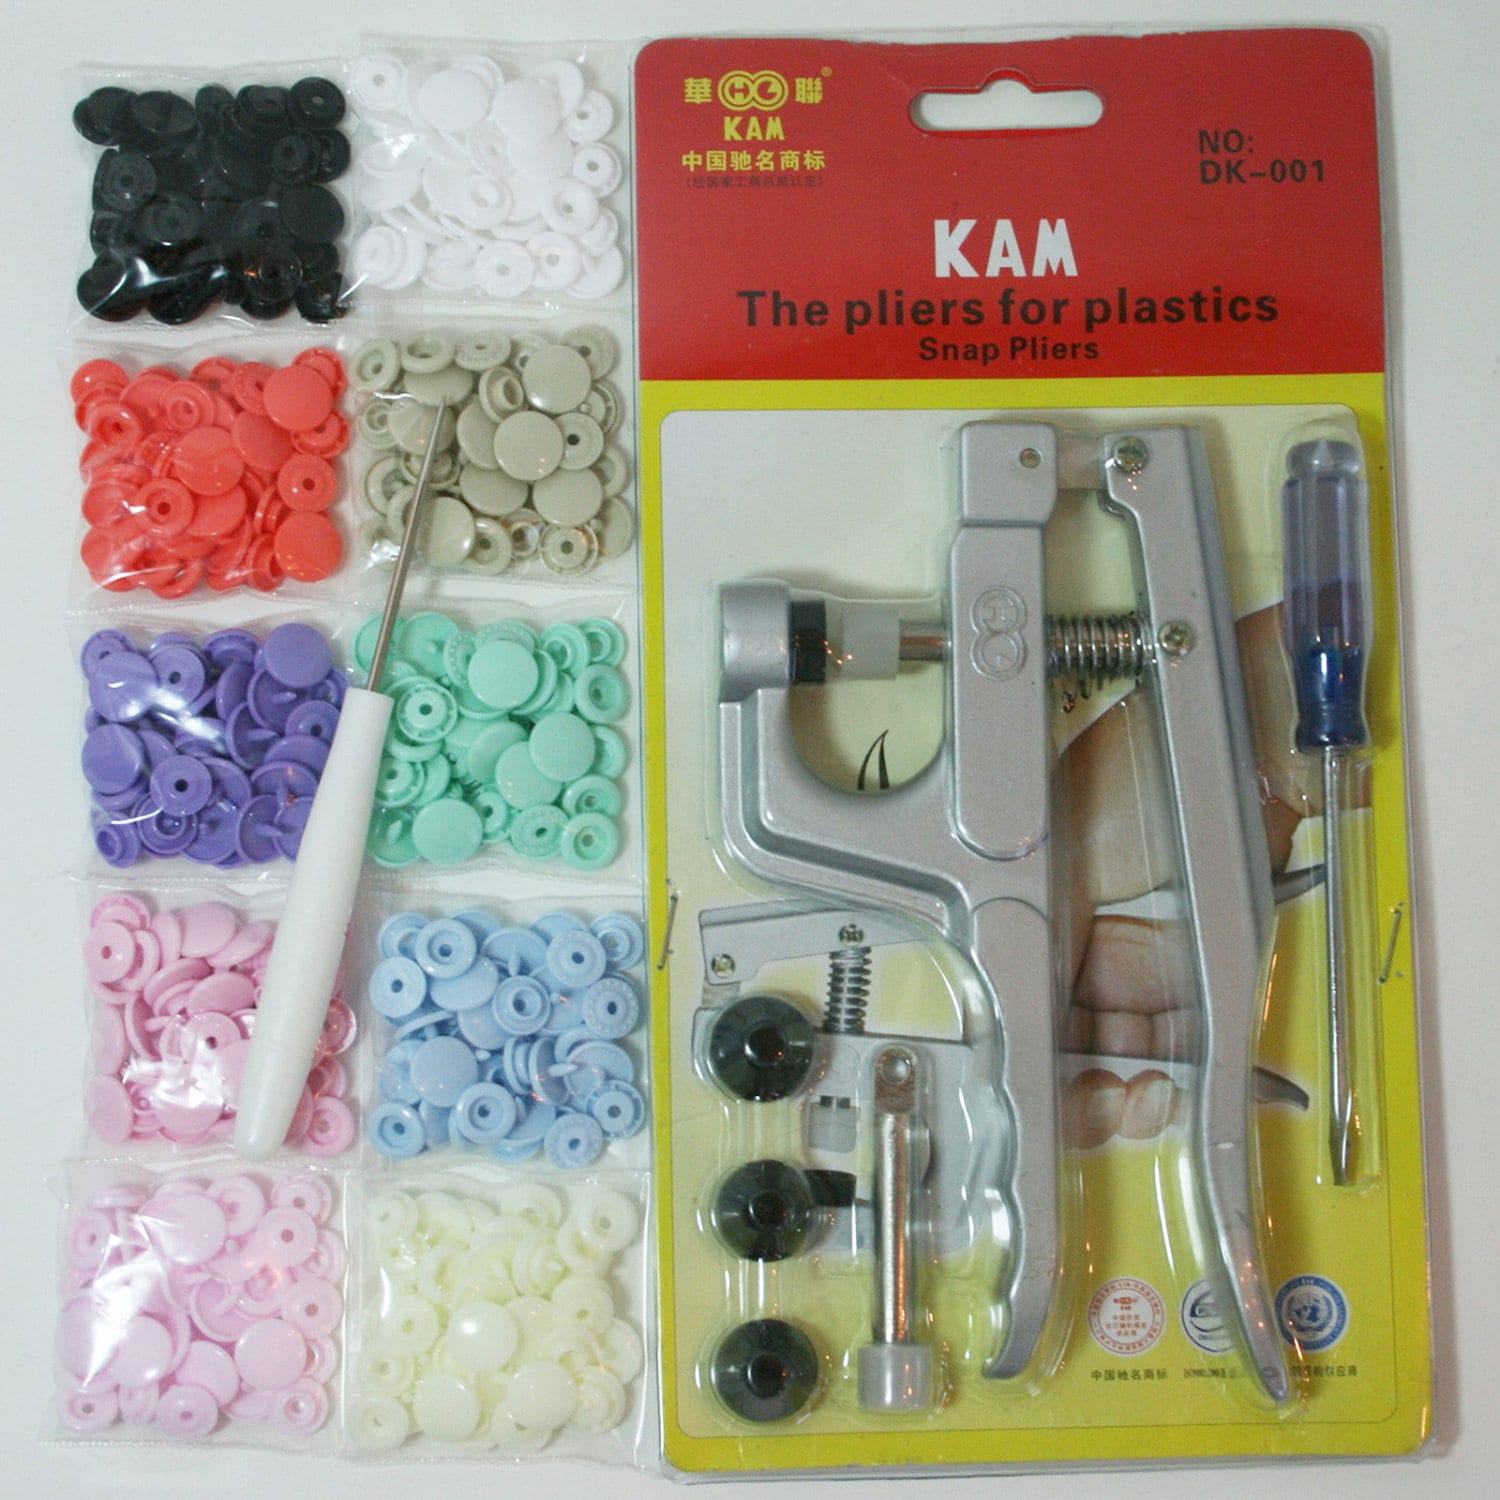 Plastic Snaps Buttons Fasteners With Plier Tool T3 No-sew KAM Snap